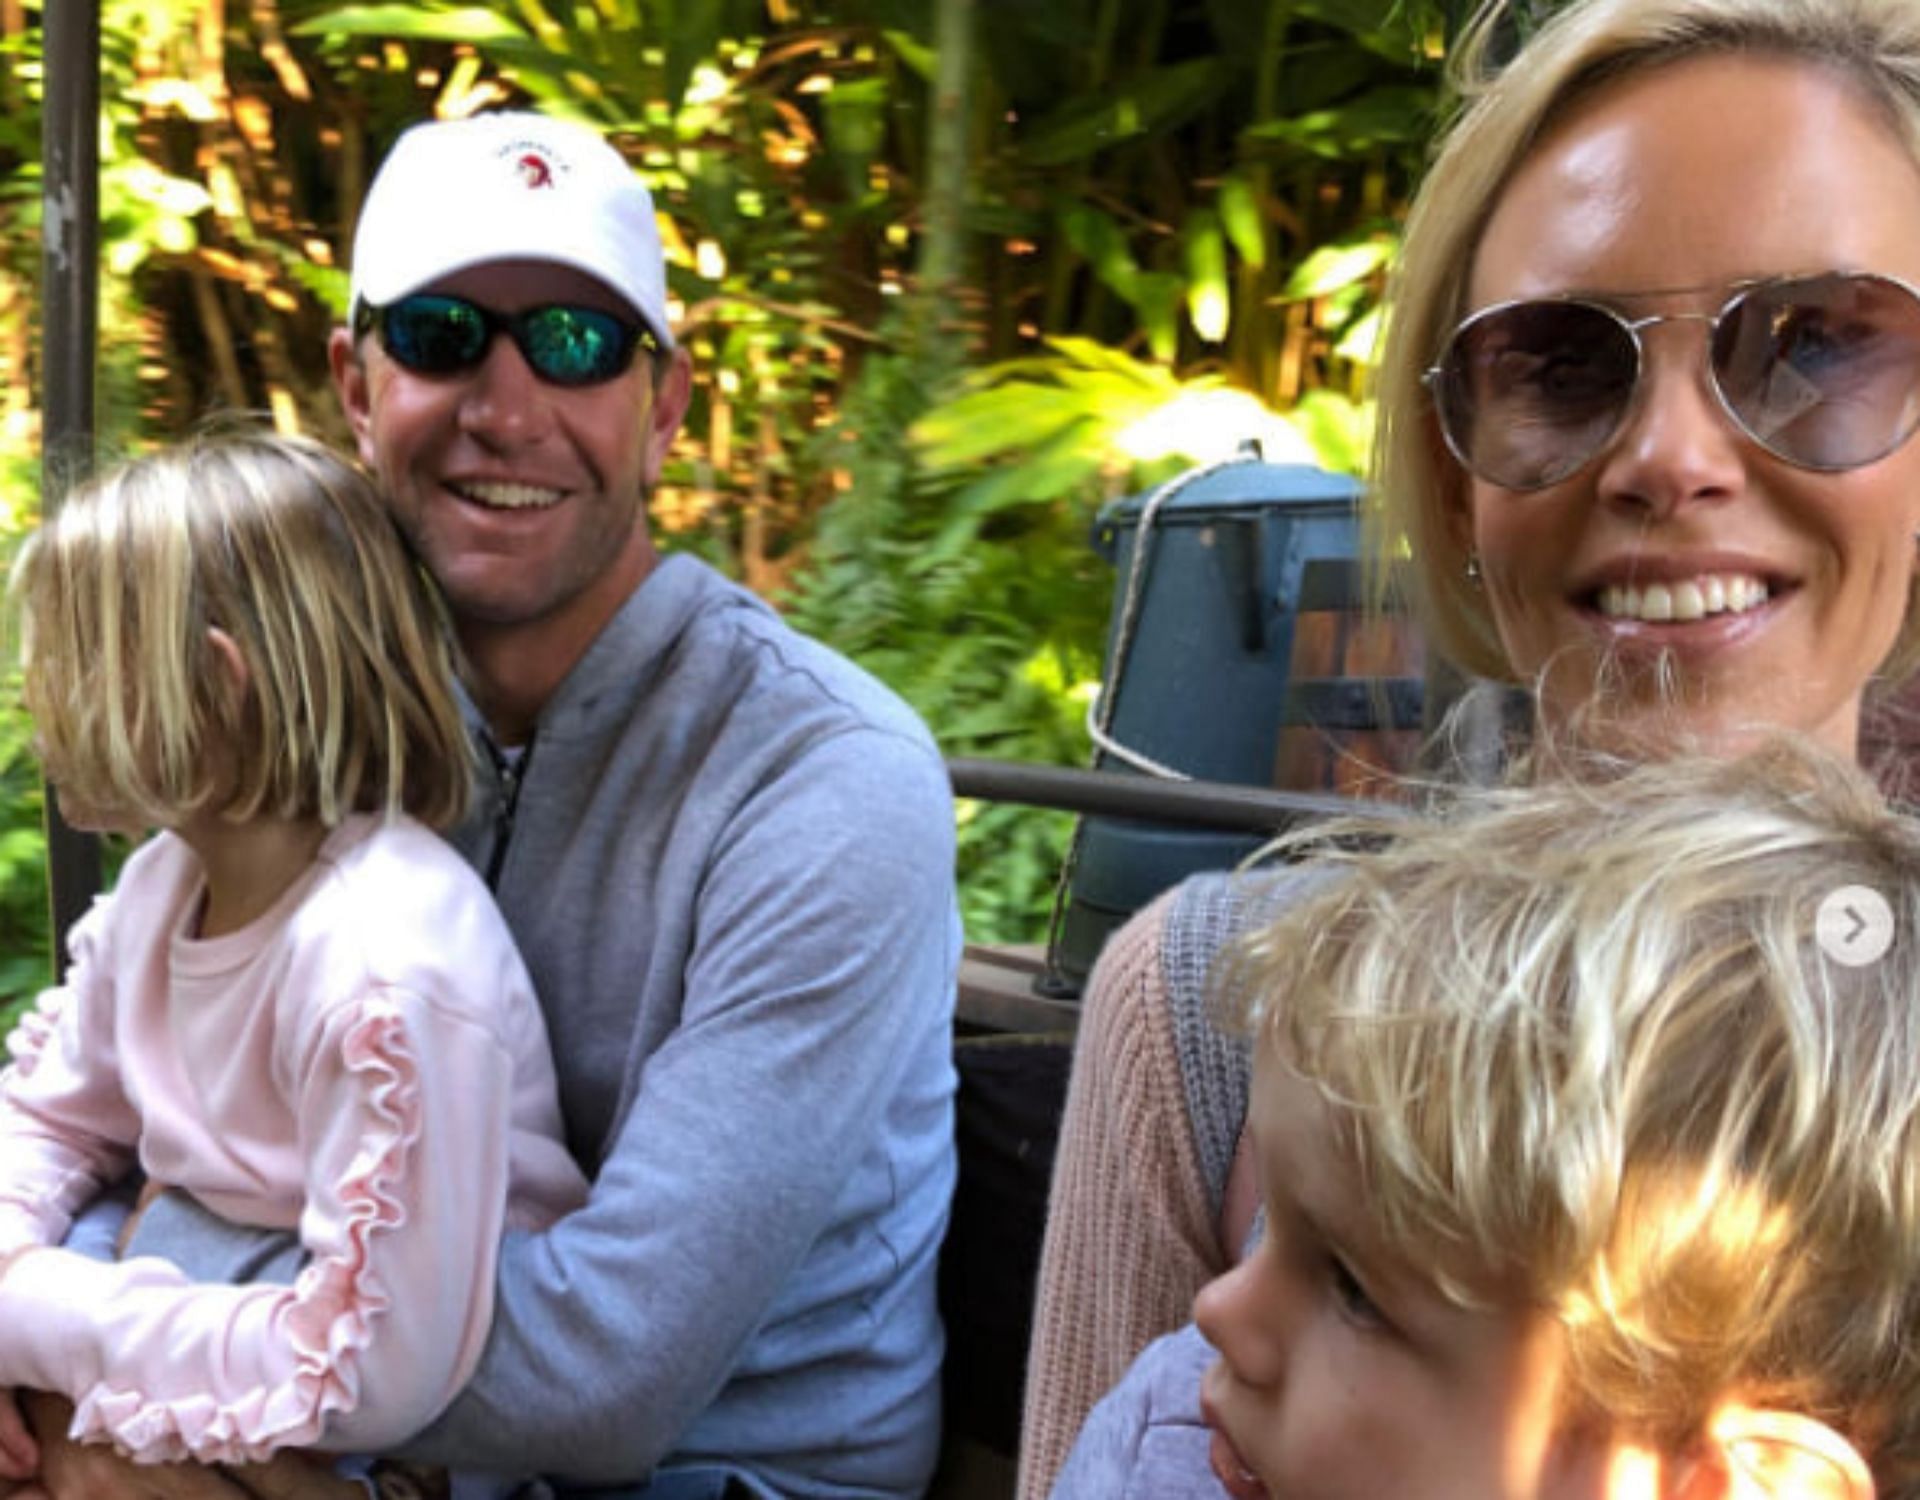 Lucas Glover and his wife Krista with their kids (Image via Instagram @lucas_glover__).